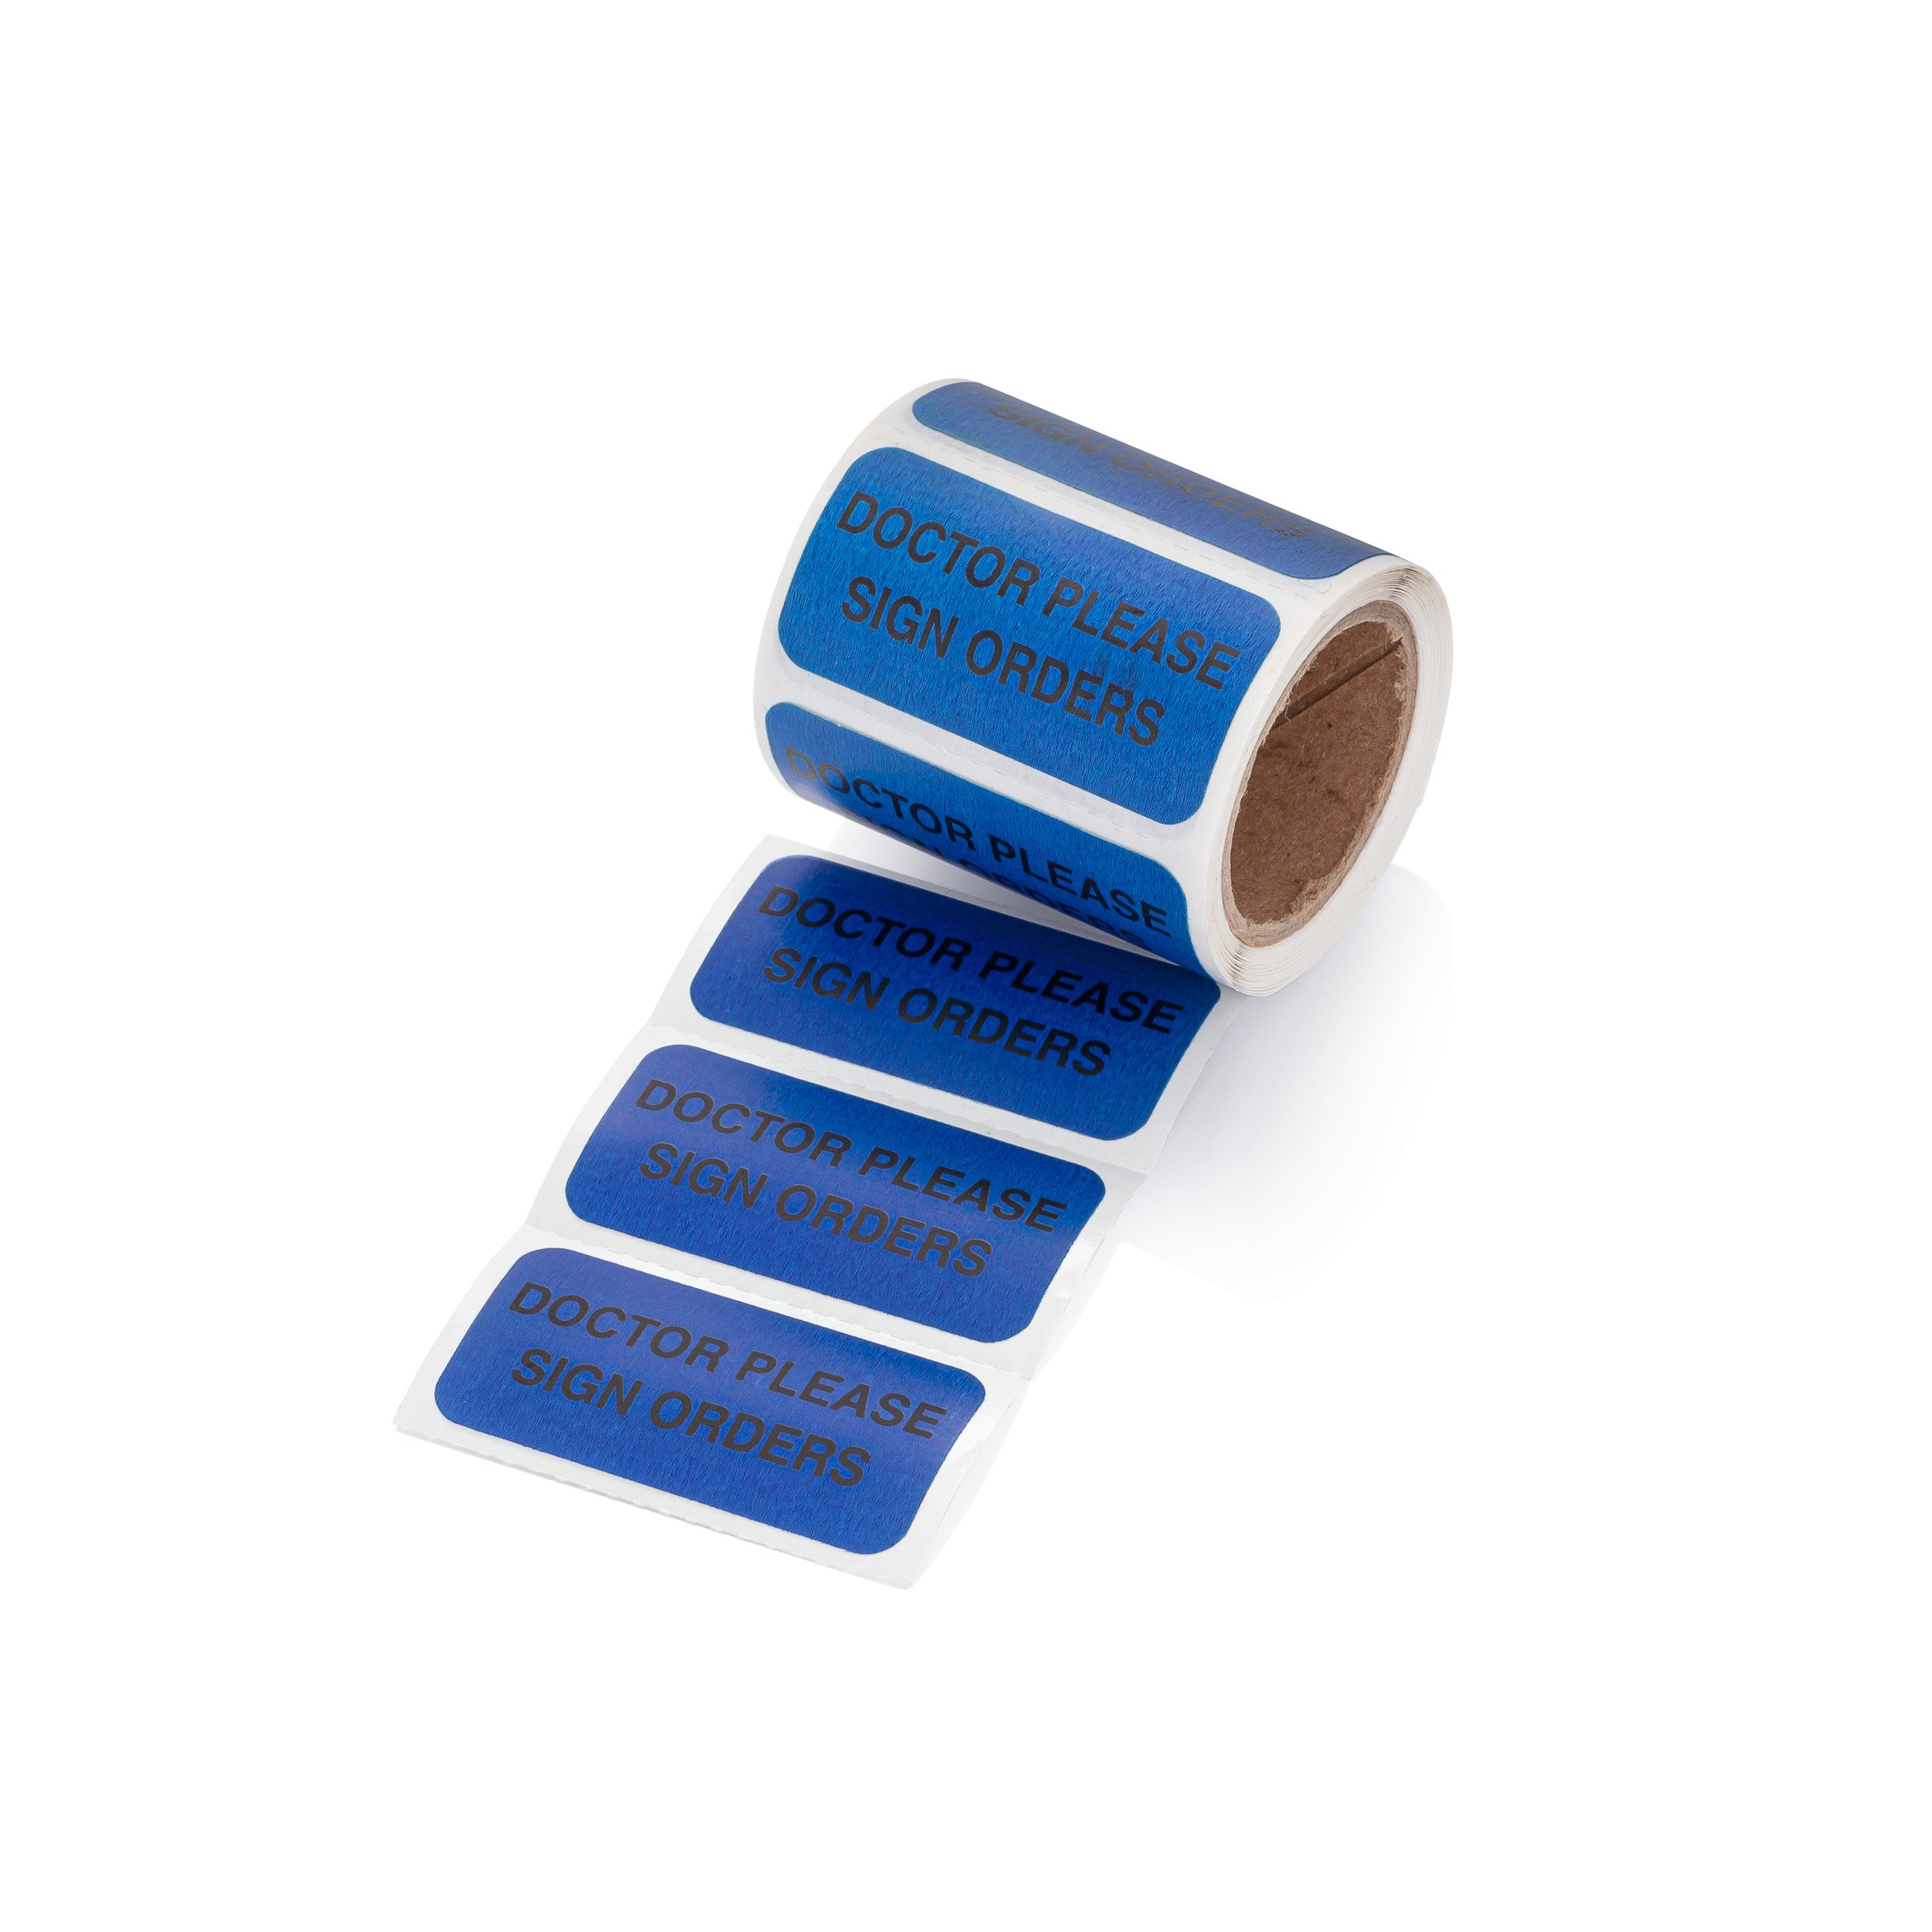 Doctor Please Sign Orders Alert and Instruction Labels, Blue, W1.5" x H.75" (Roll of 100)